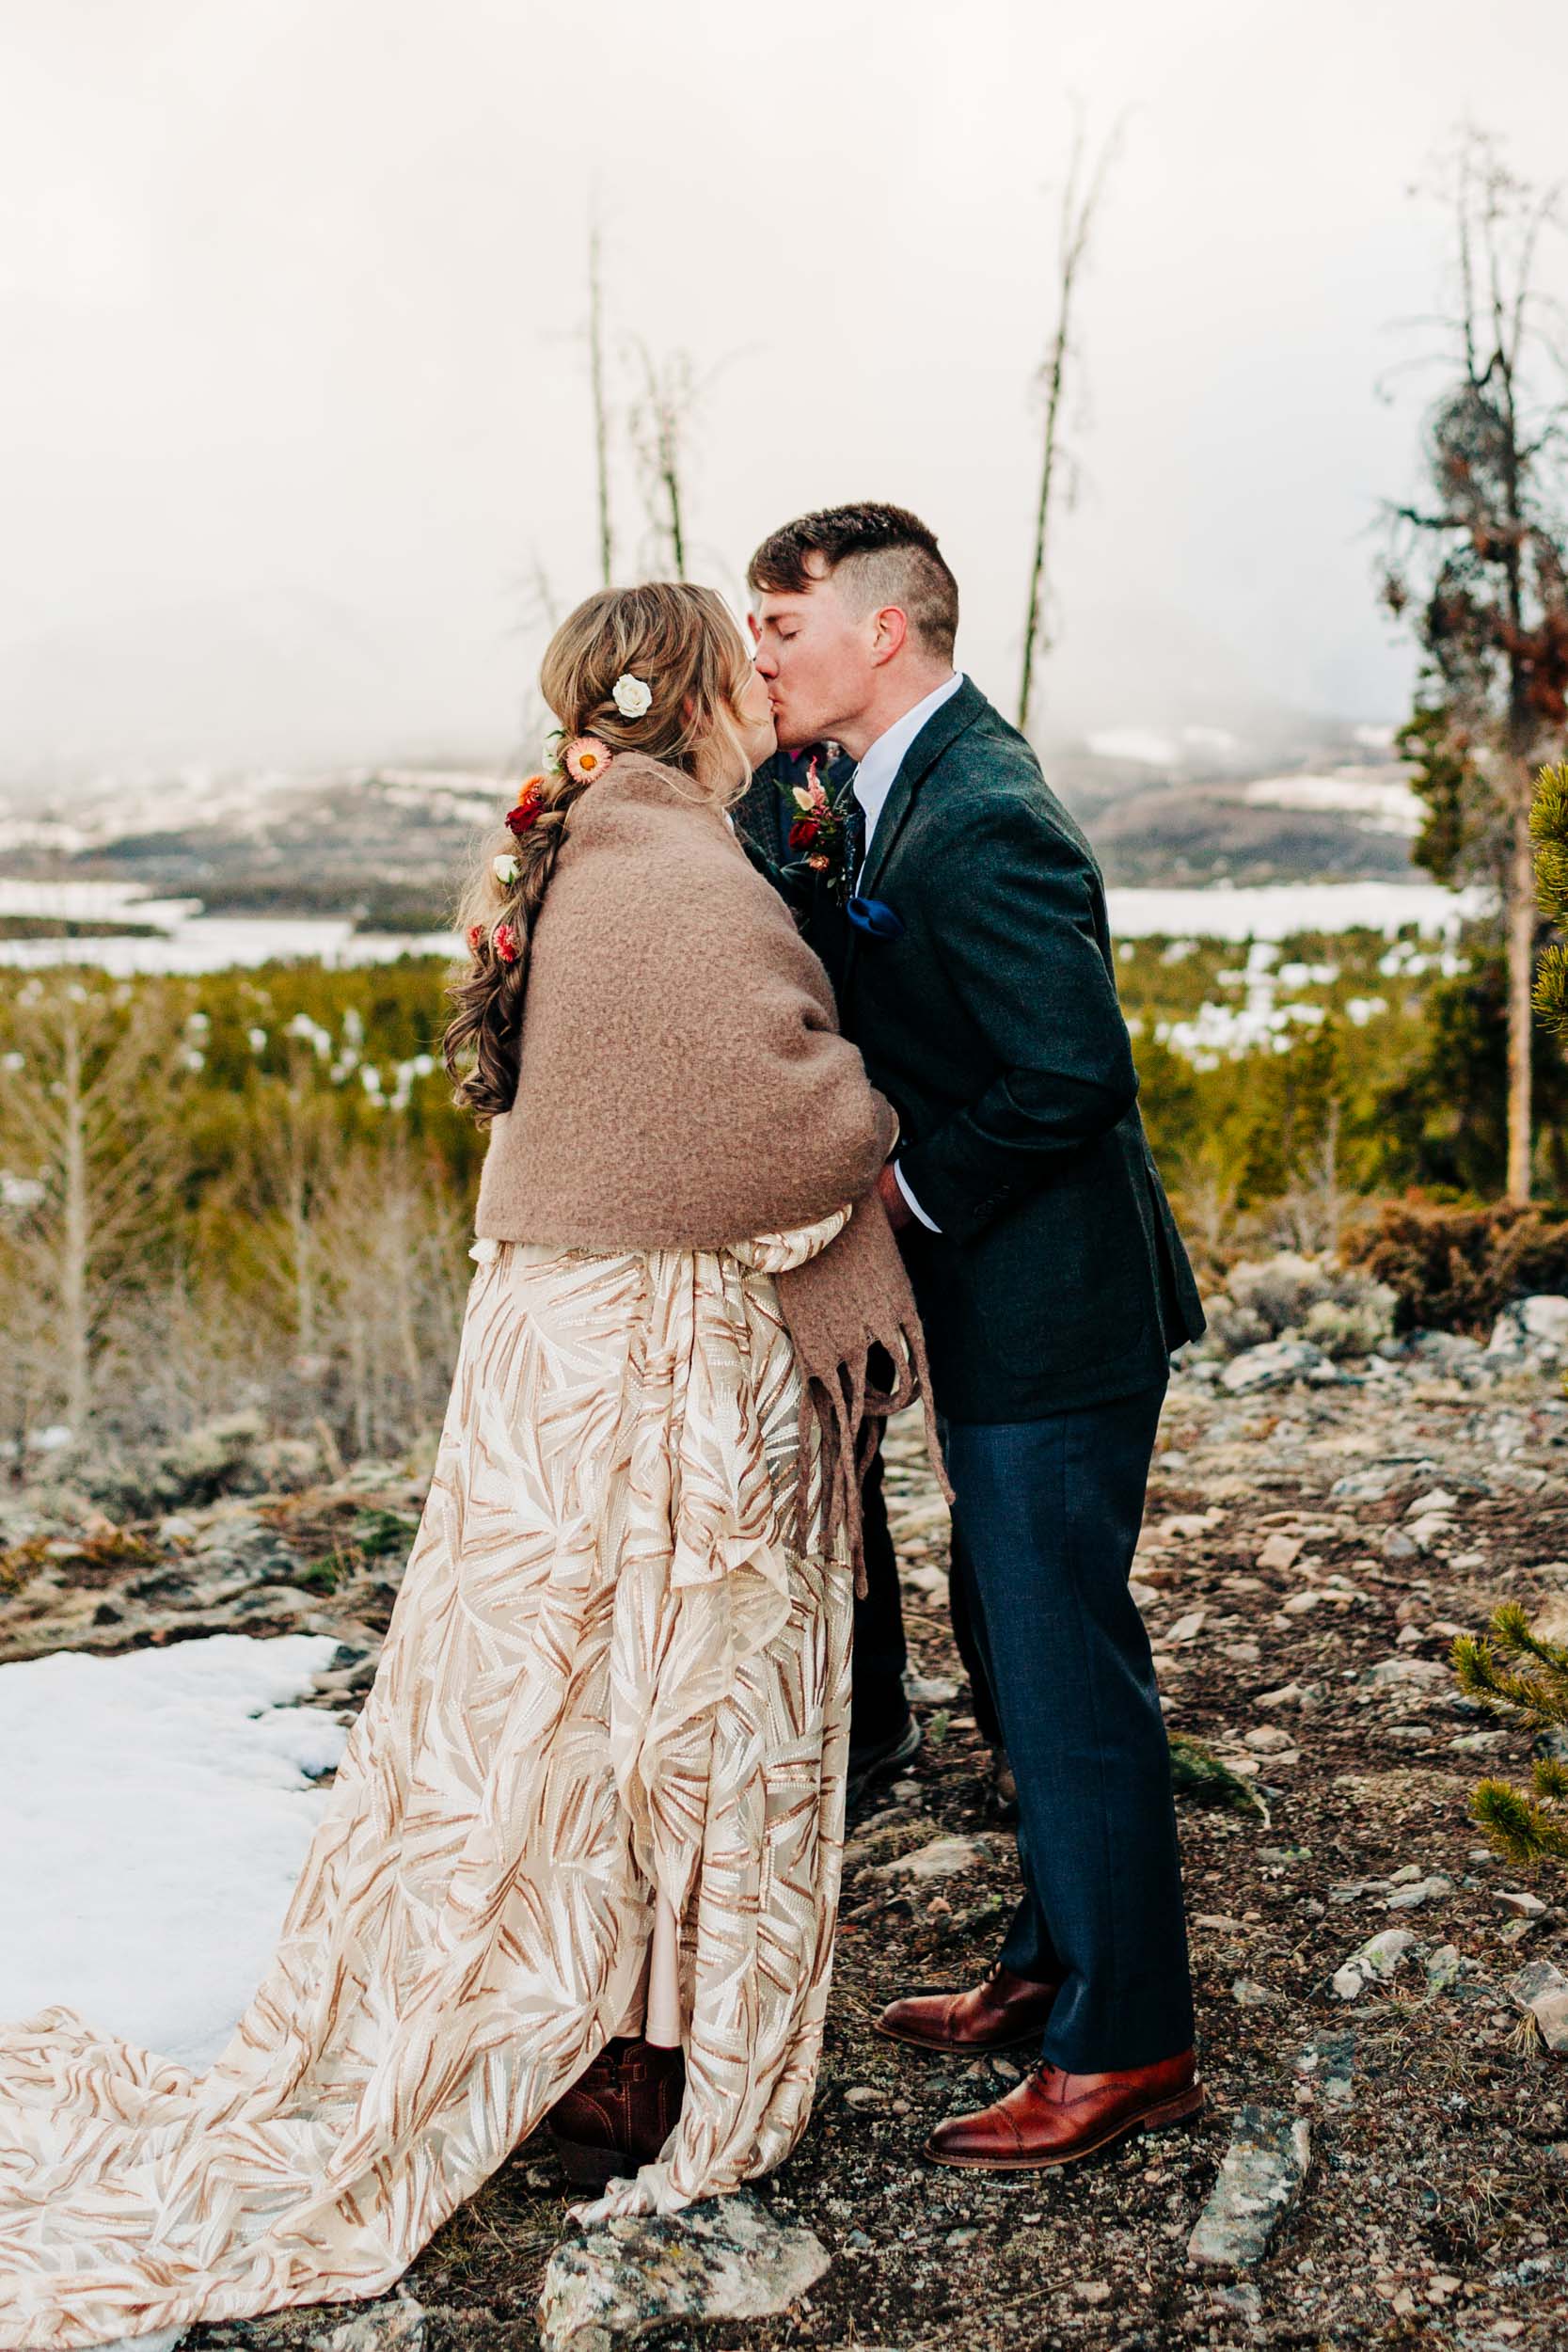 Elopement ceremony first kiss